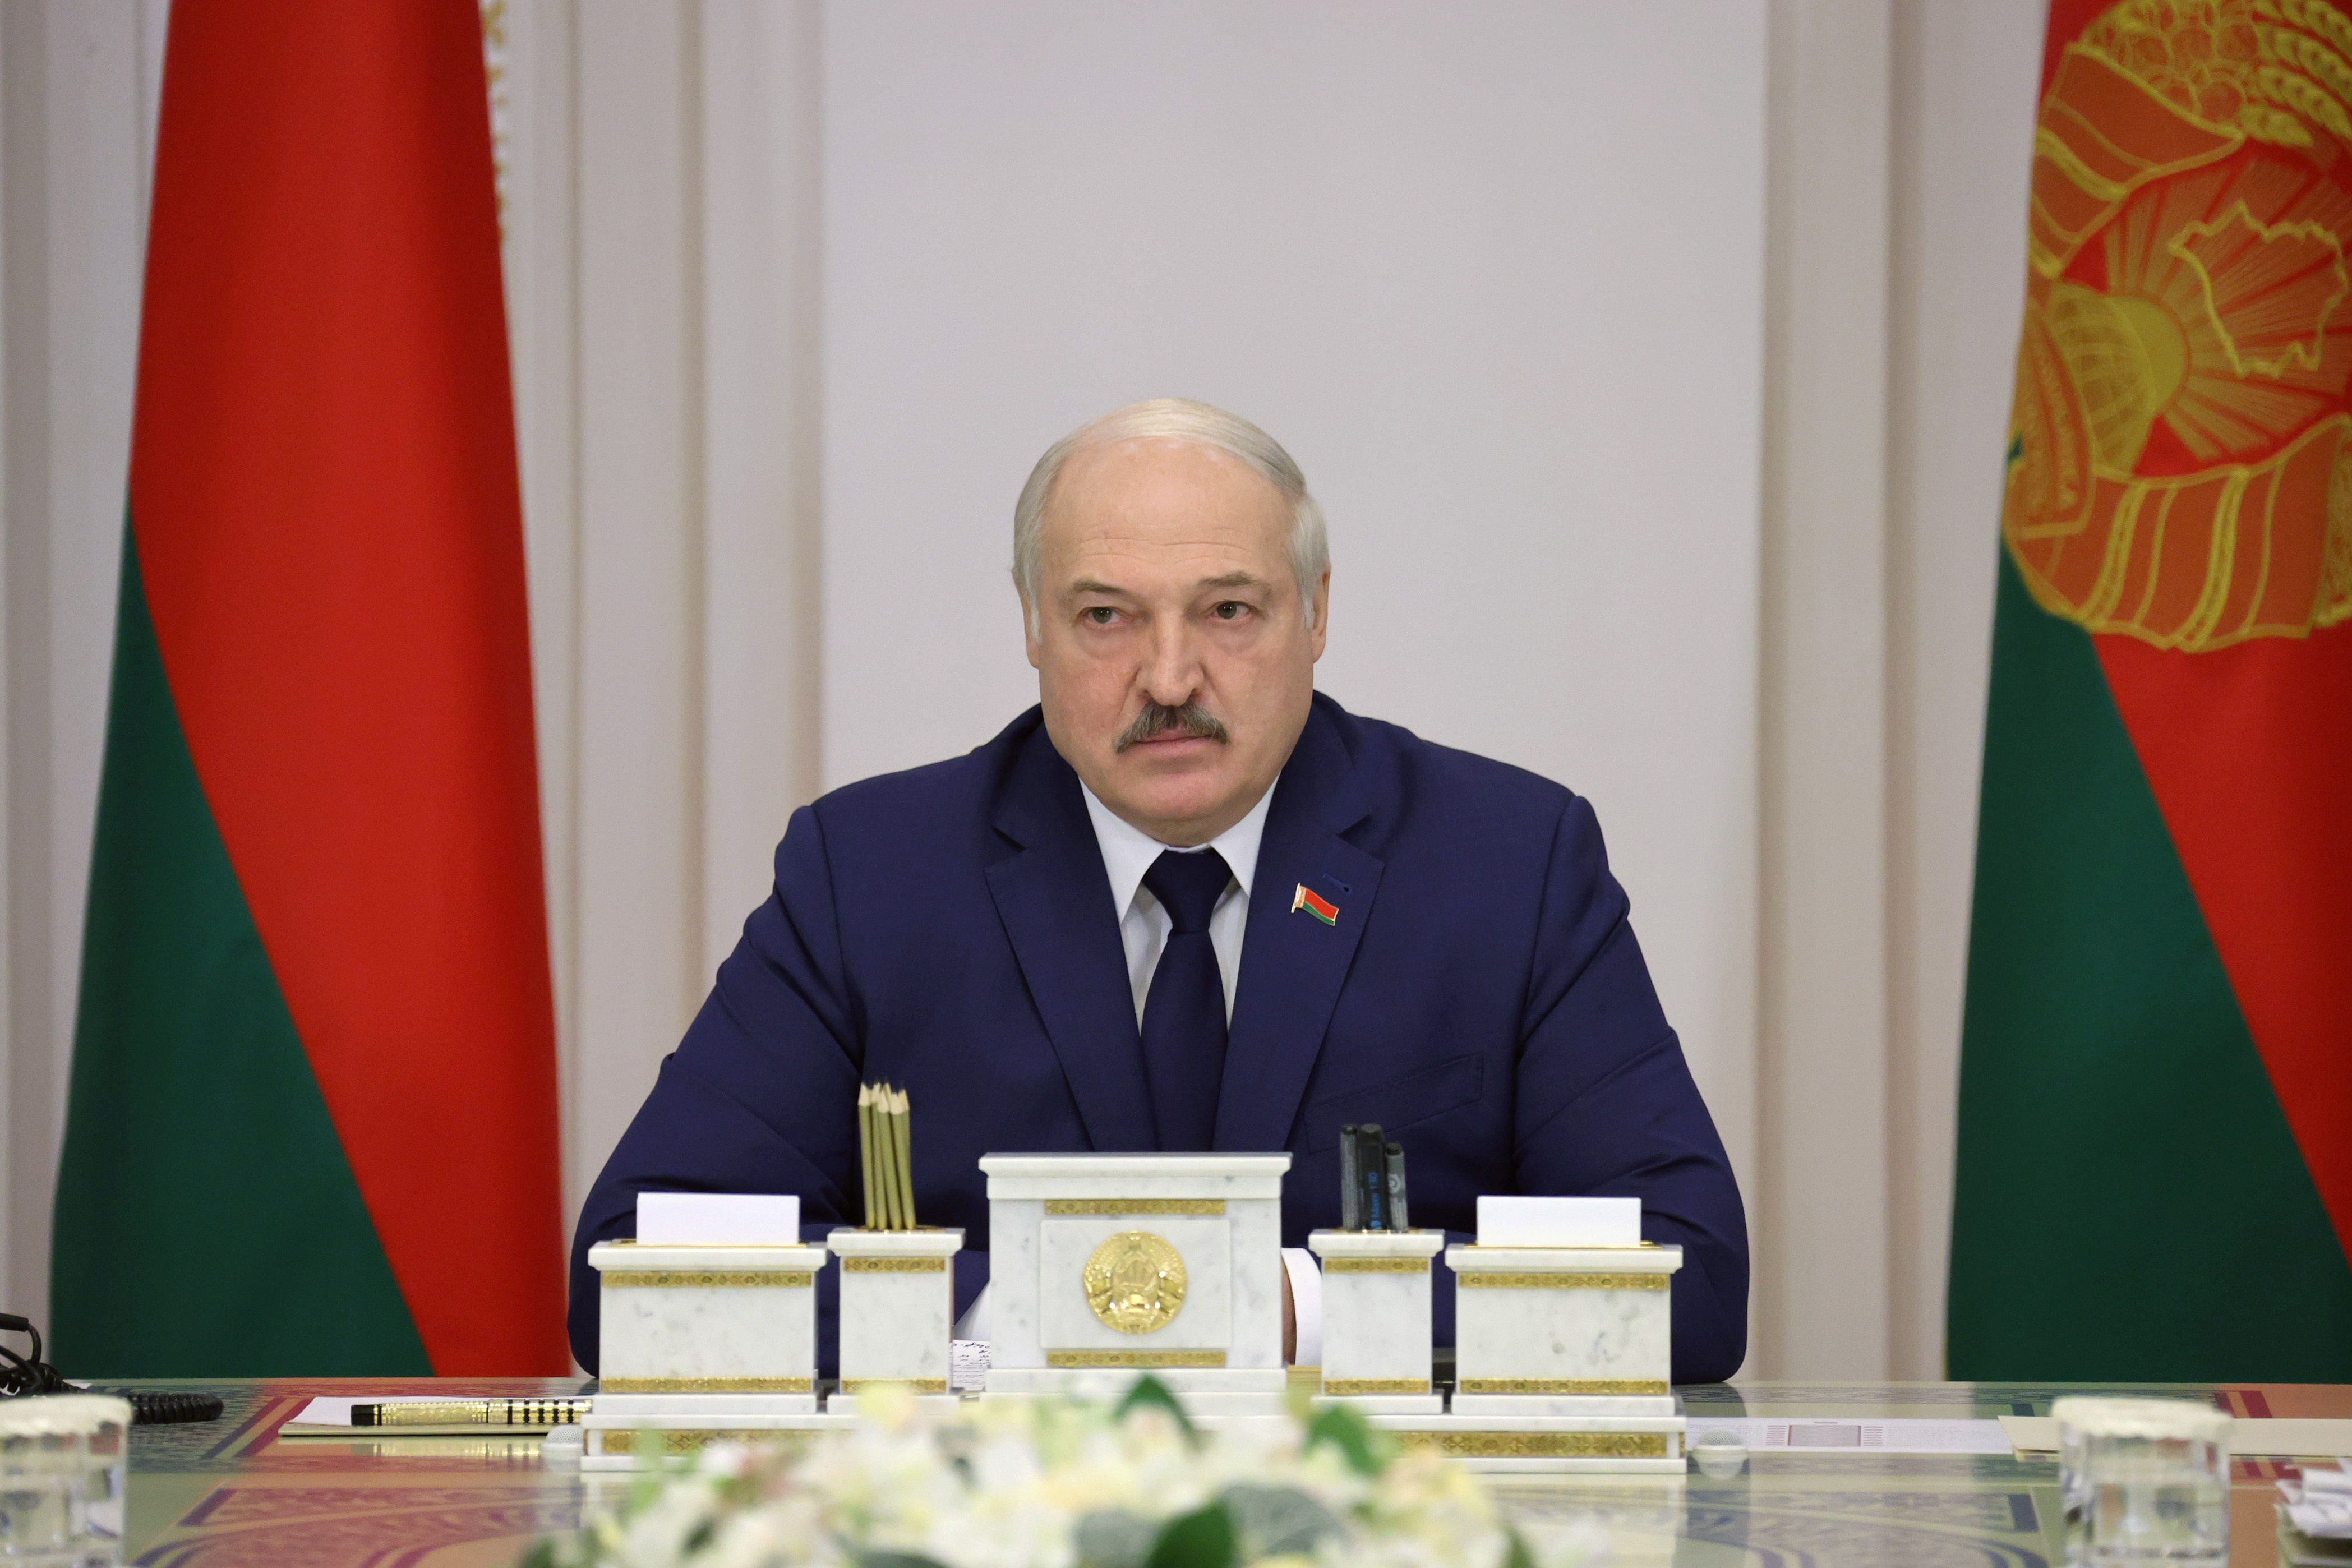 image Kremlin says Lukashenko did not consult it on threat to cut Russian gas supplies